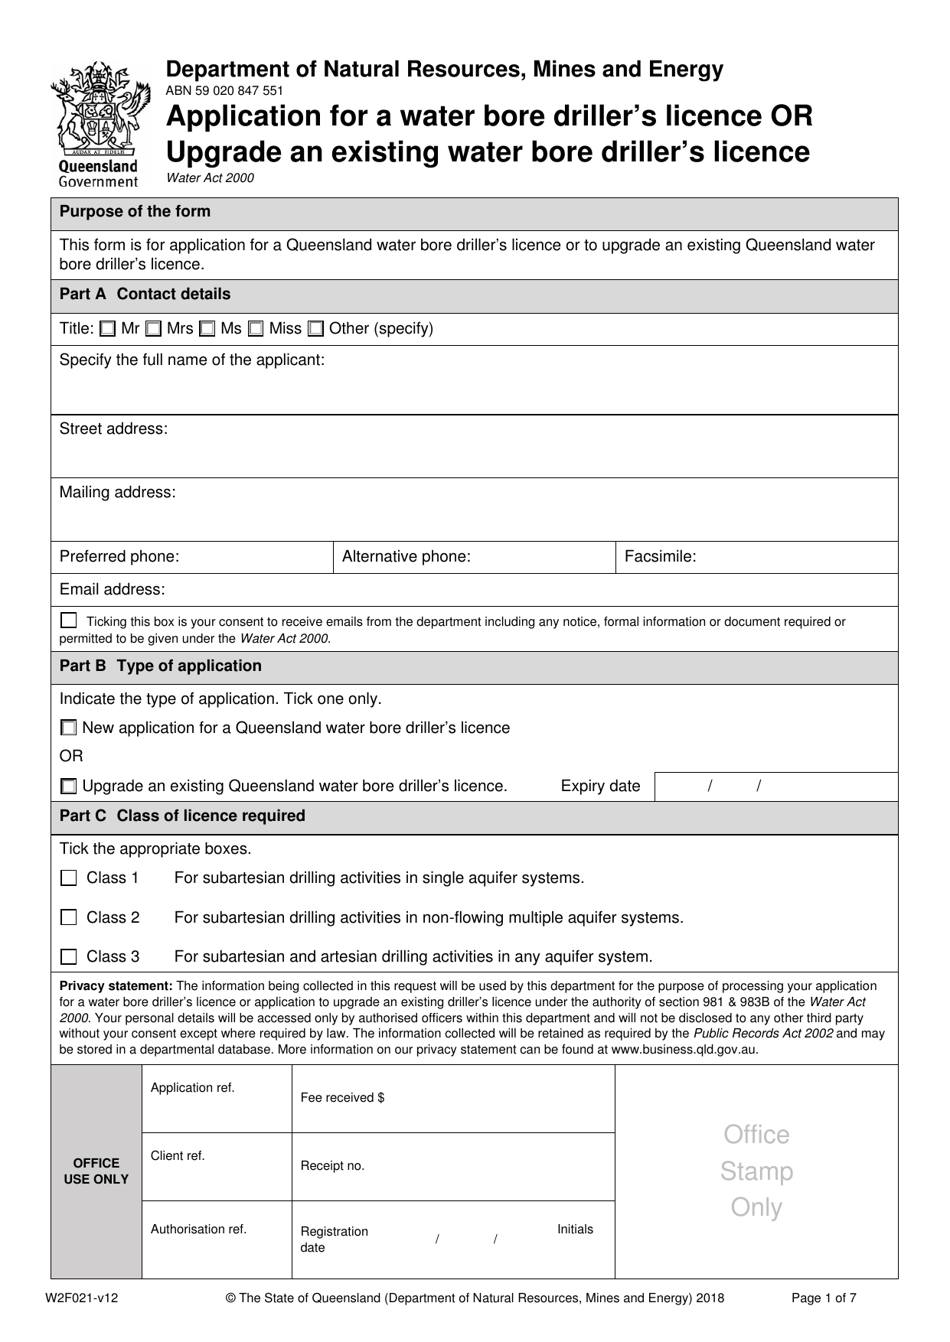 Form W2F021 Application for a Water Bore Drillers Licence or Upgrade an Existing Water Bore Drillers Licence - Queensland, Australia, Page 1